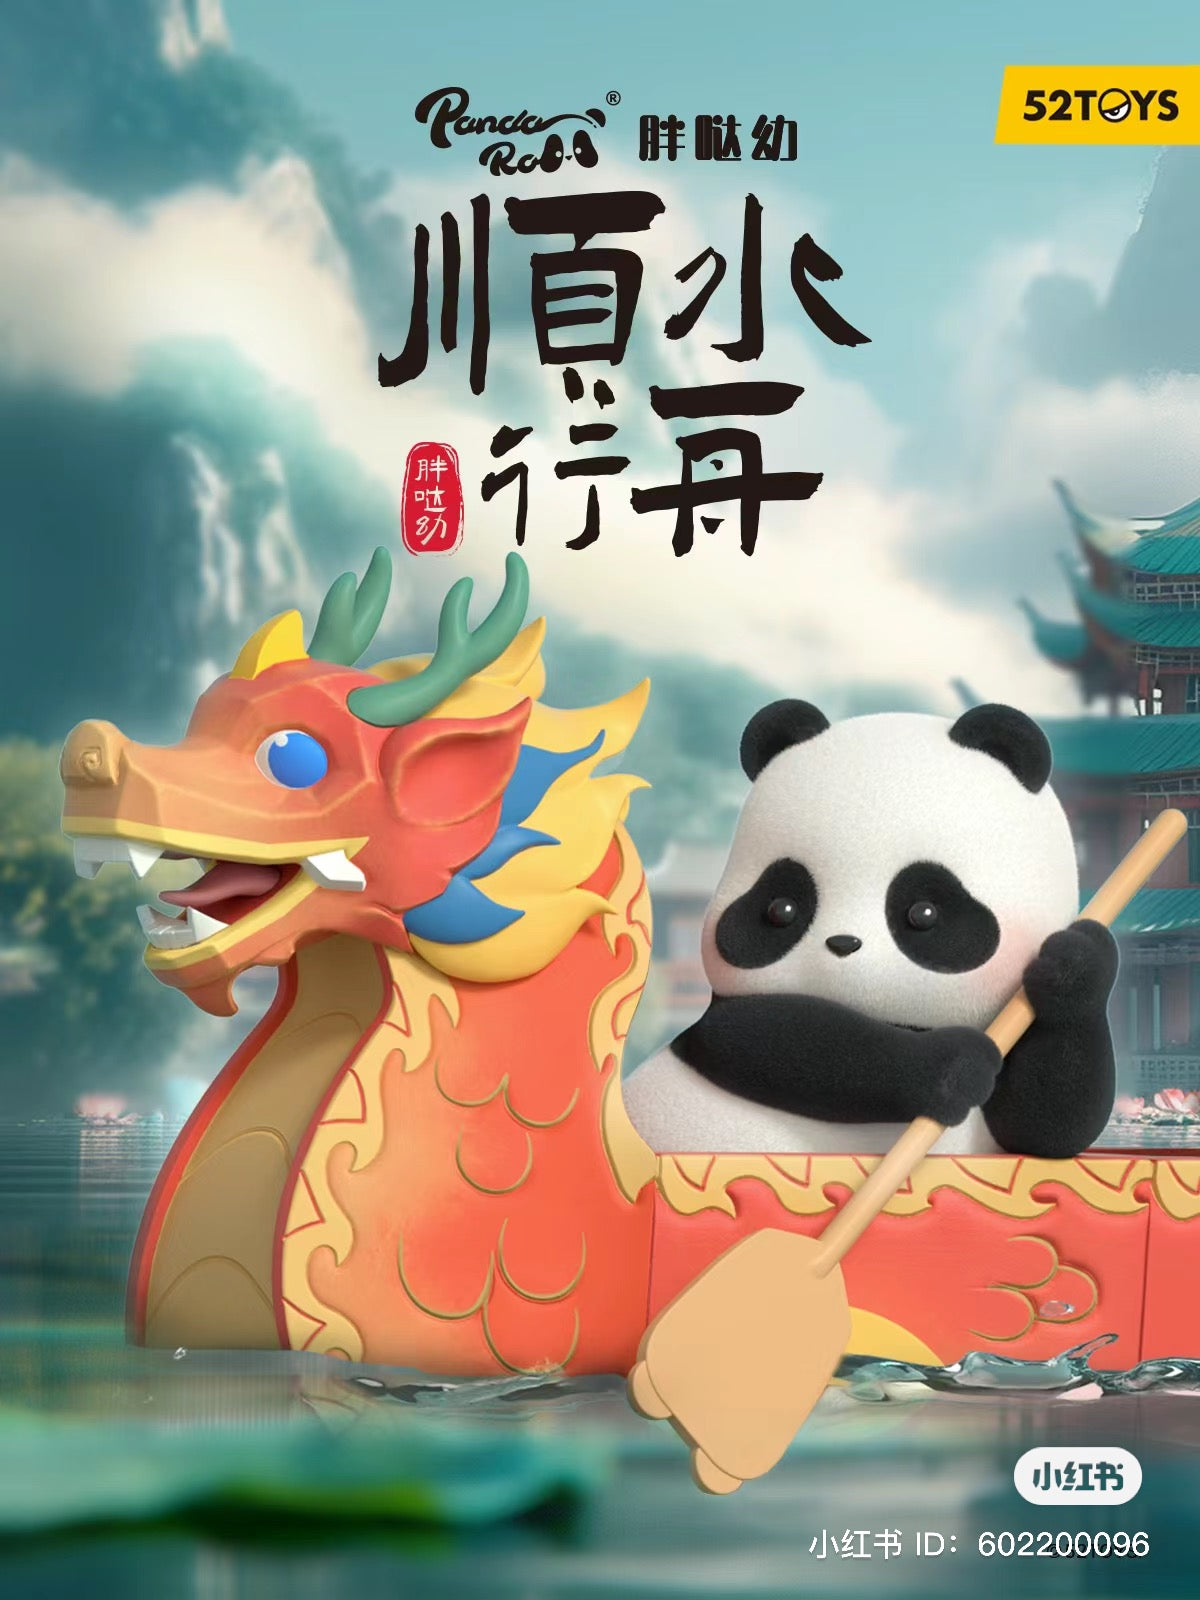 A blind box series featuring Panda Roll- Row a Dragon Boat. Preorder now for 4 regular designs and 2 secrets. Dive into mystery with Strangecat Toys.